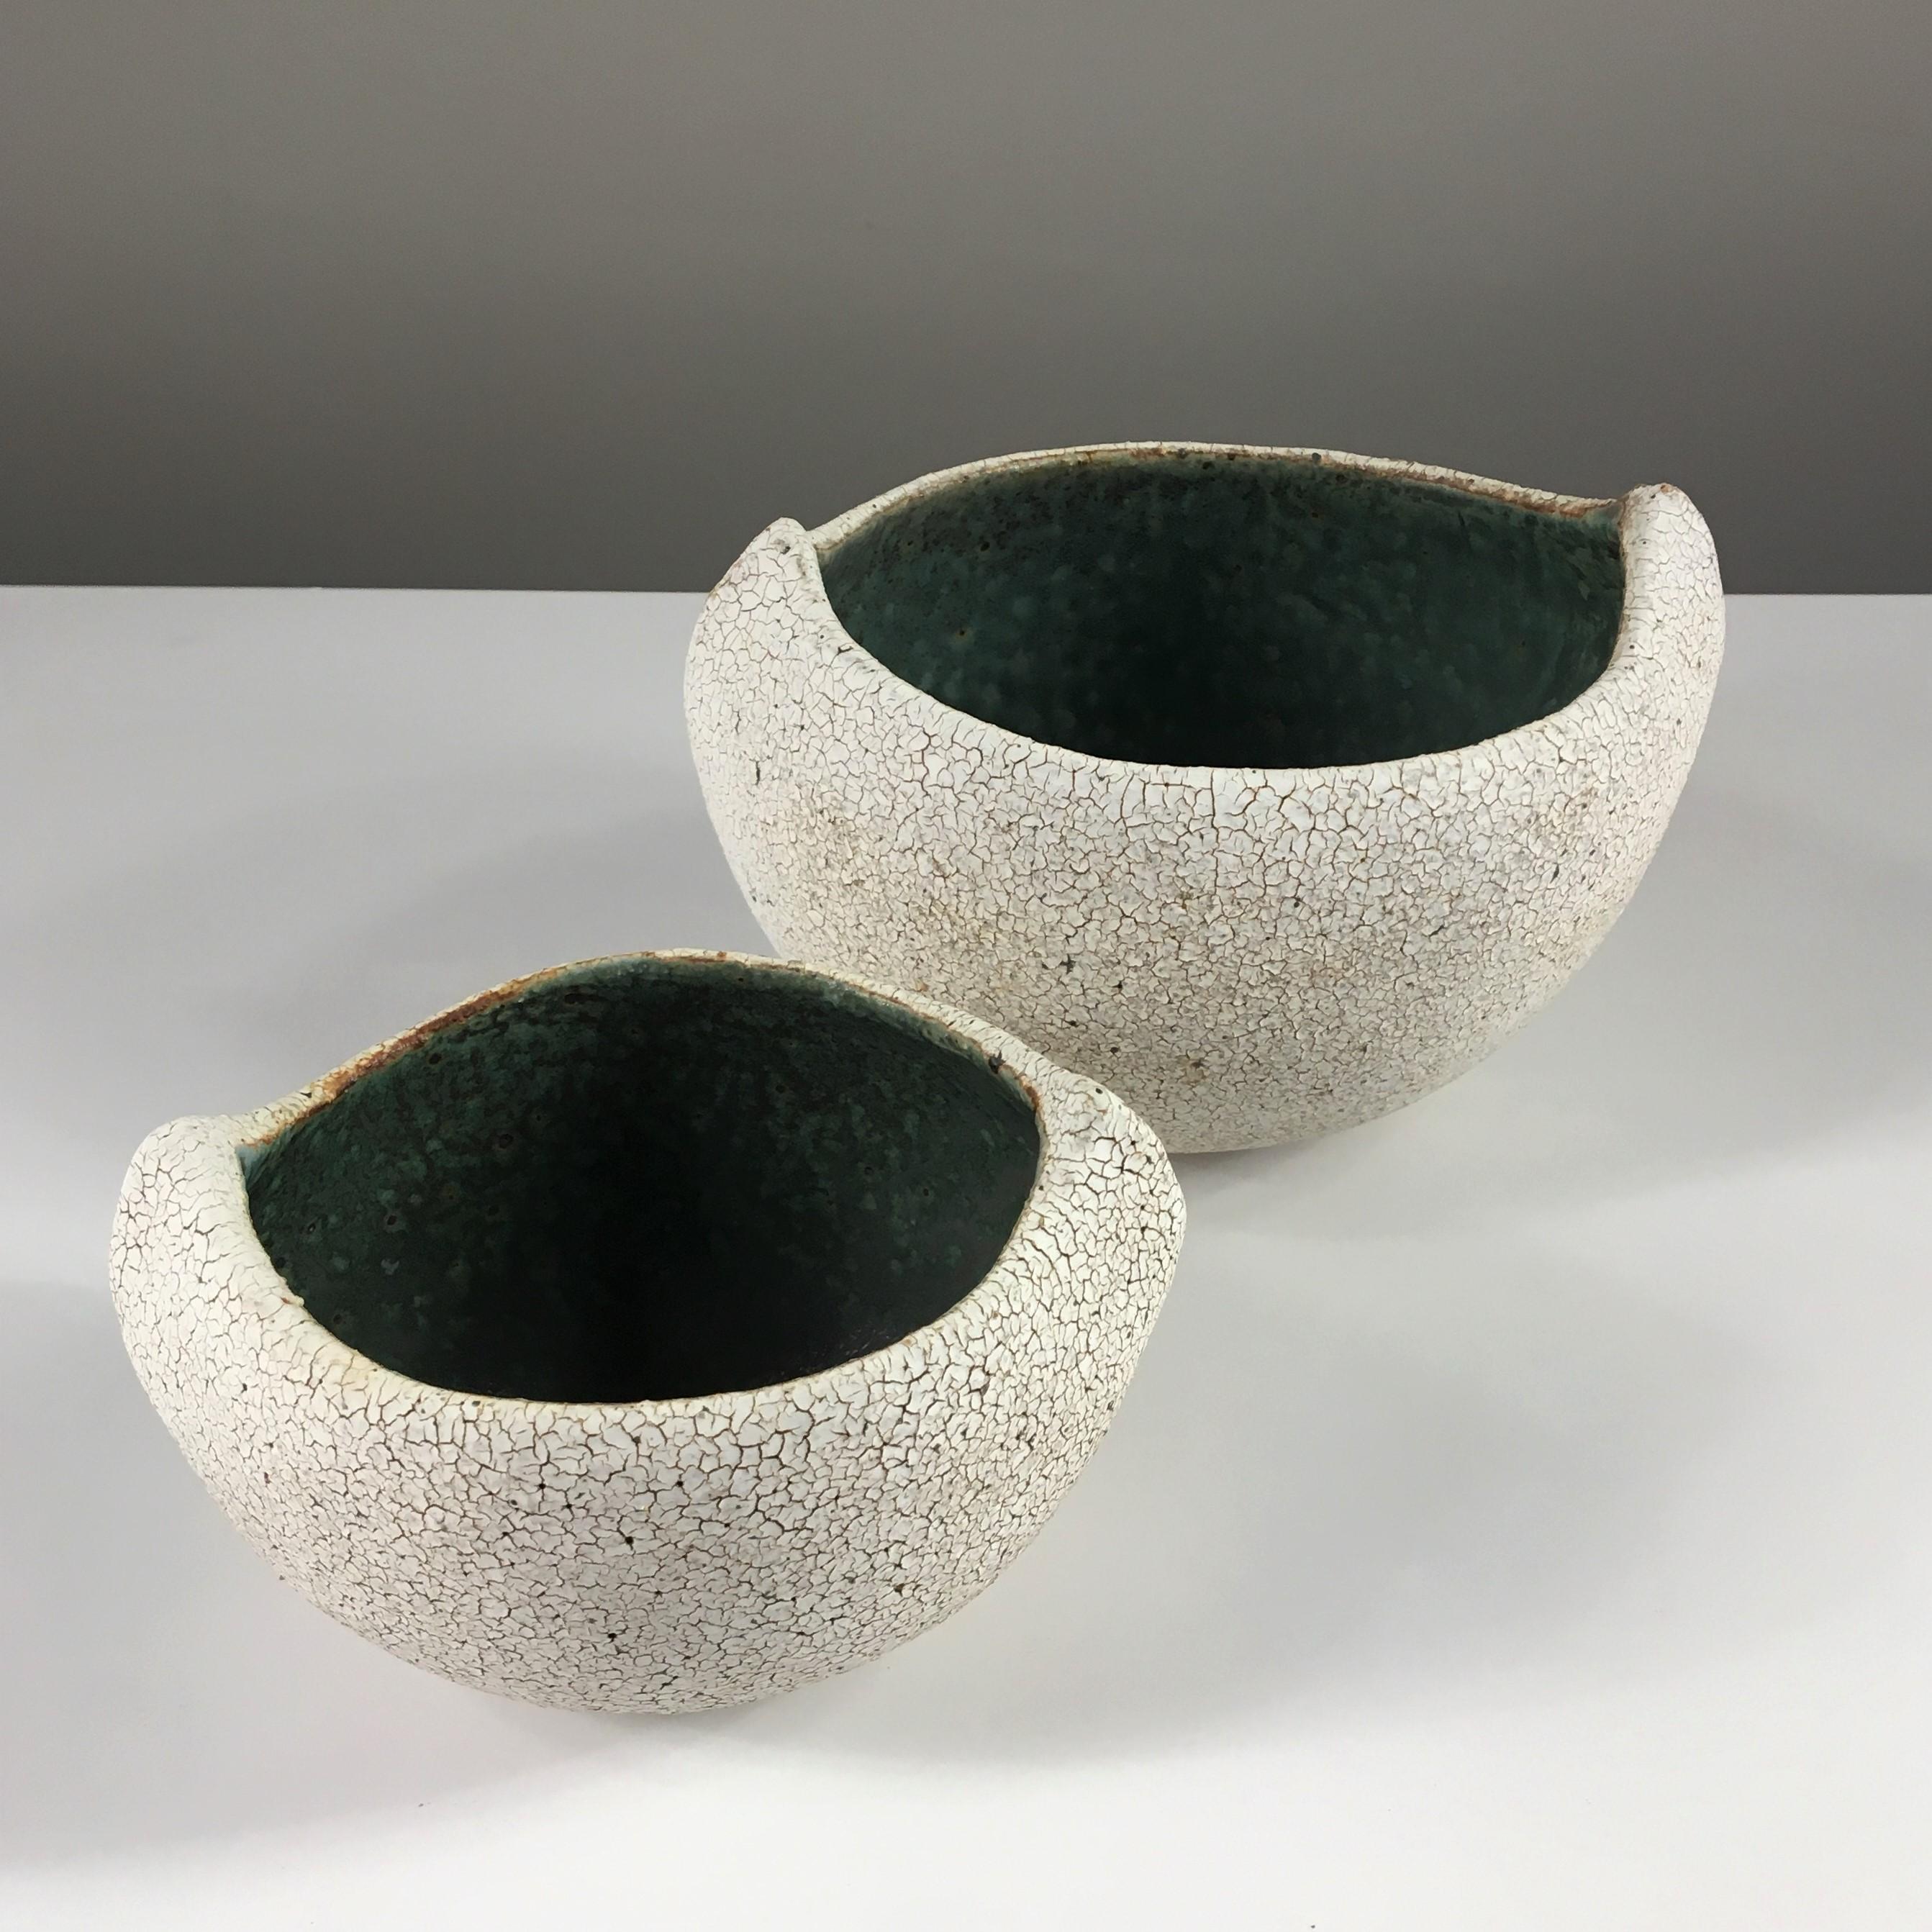 Set of 2 Boat Shaped Bowls with Inner Glaze by Yumiko Kuga. Dimensions: W 7